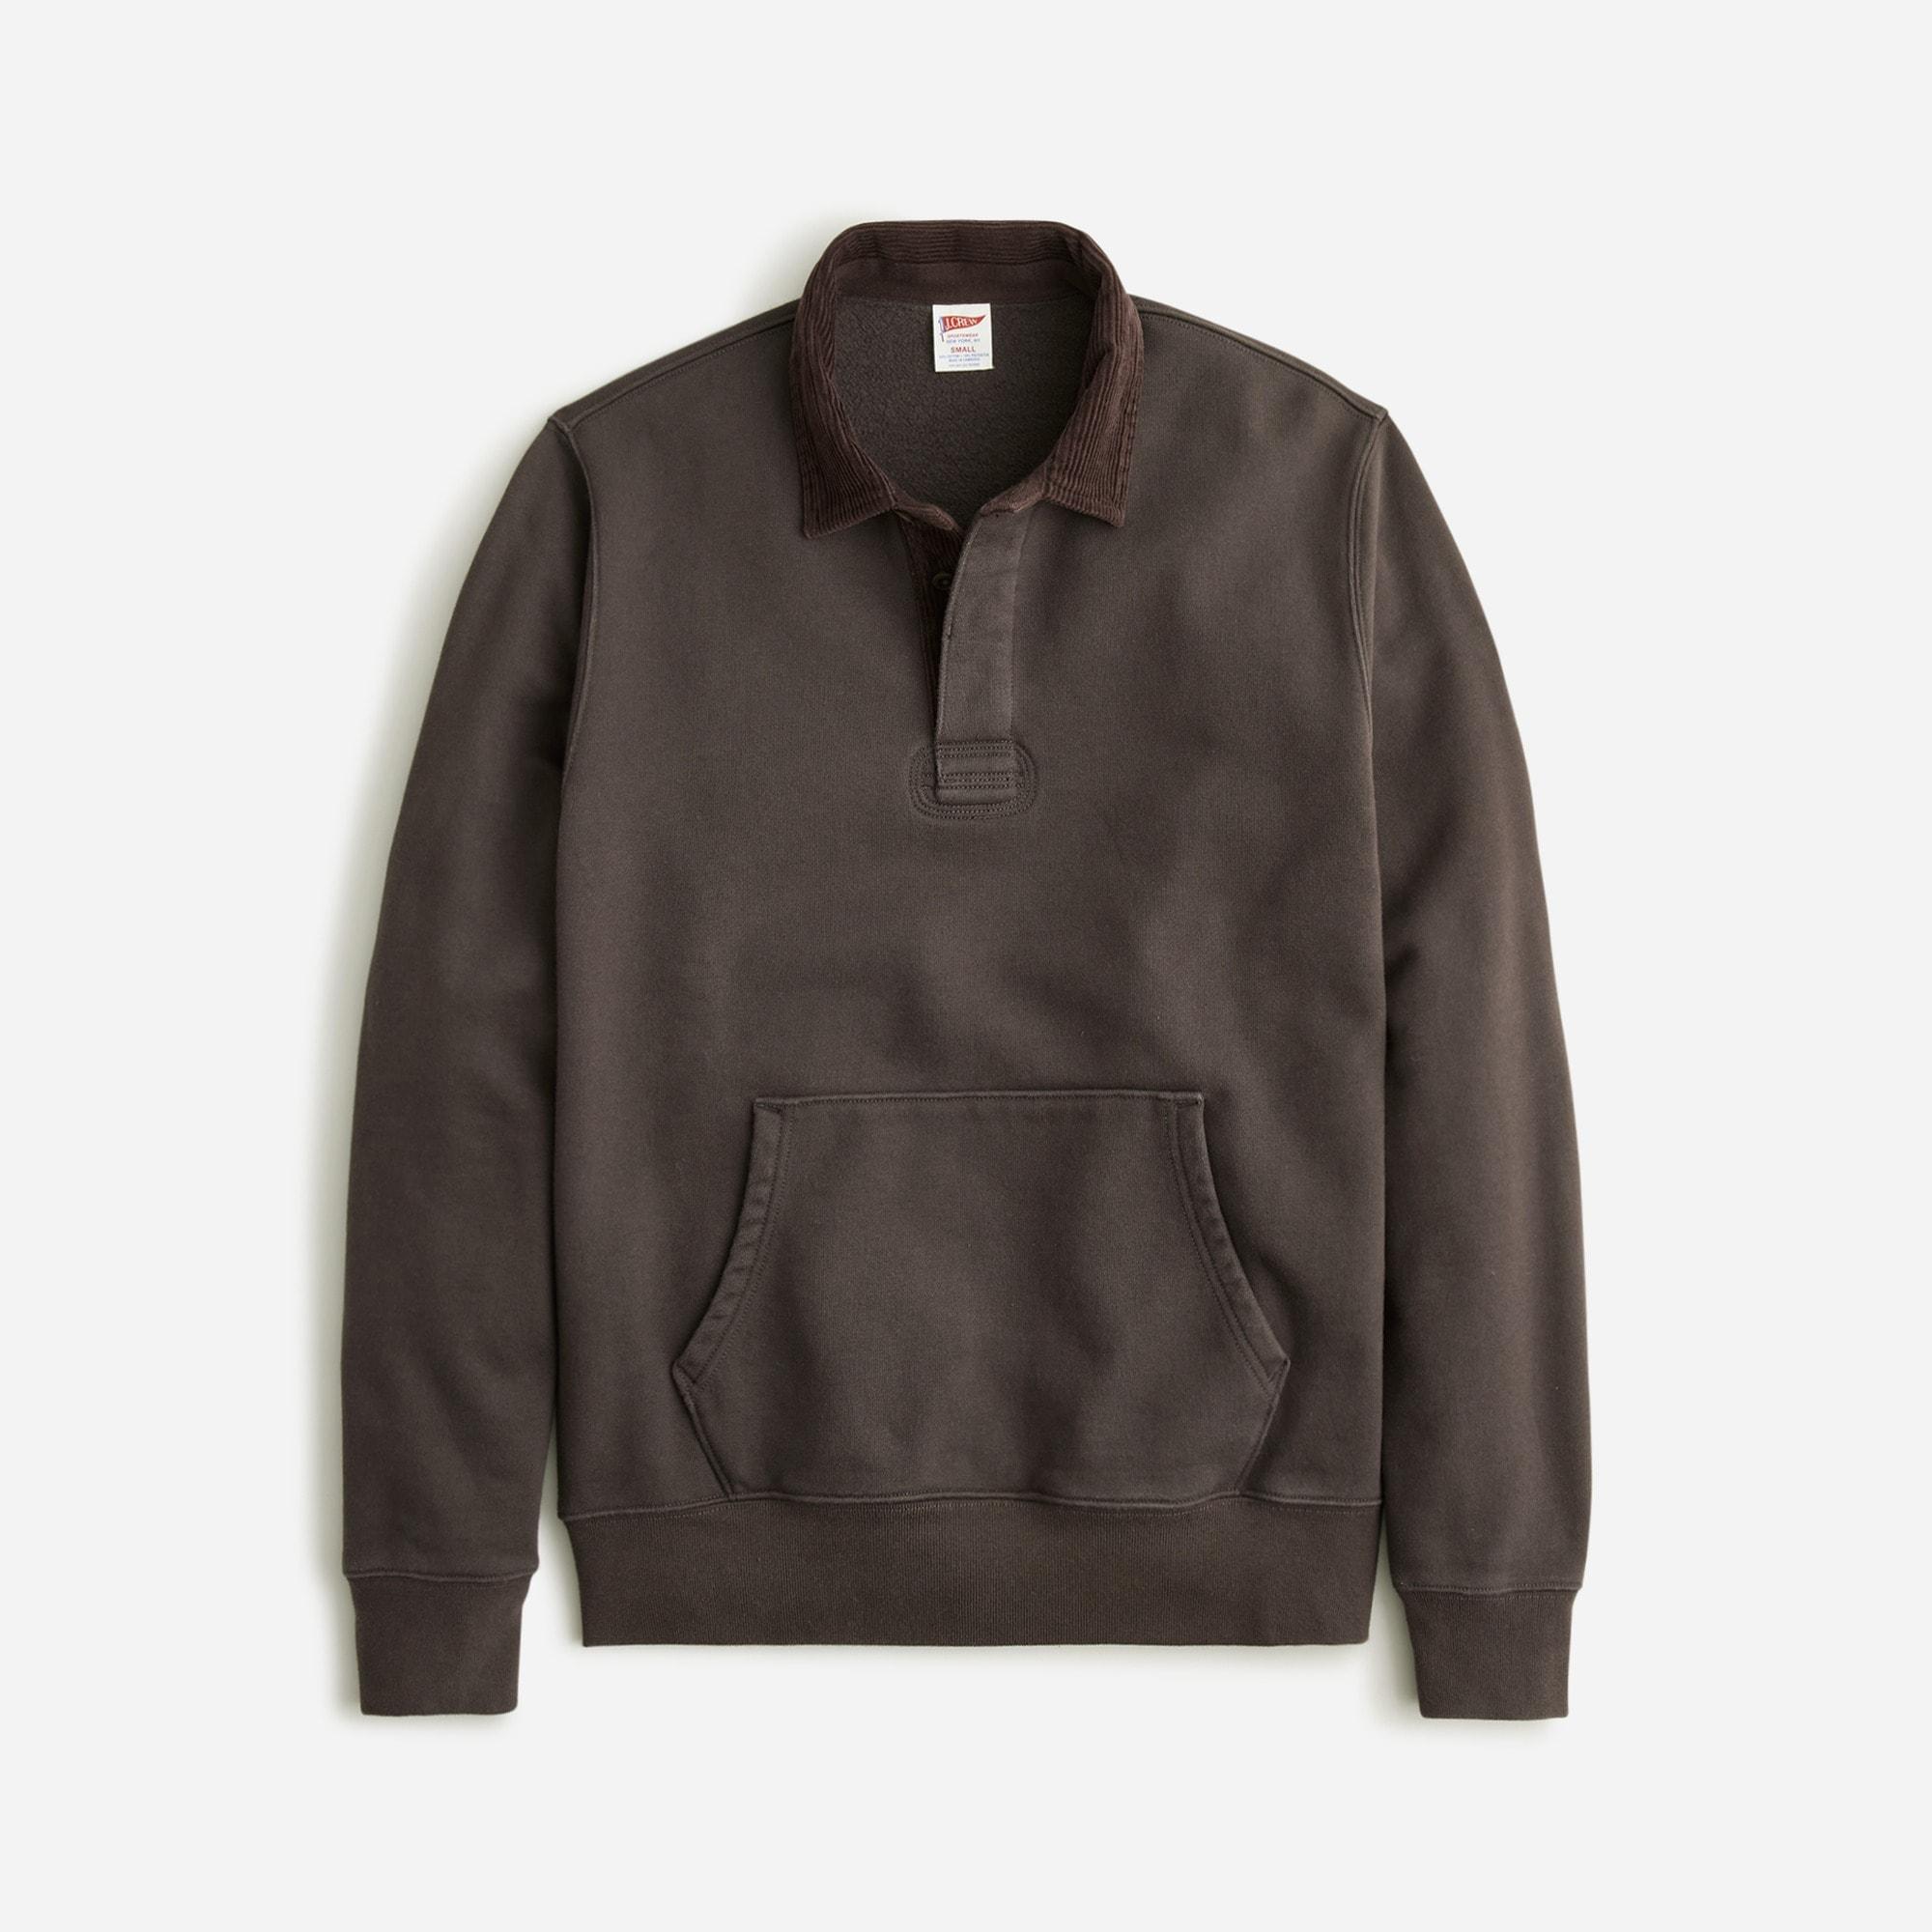 J.Crew Heritage 14 Oz. Fleece Rugby Pullover With Corduroy Collar